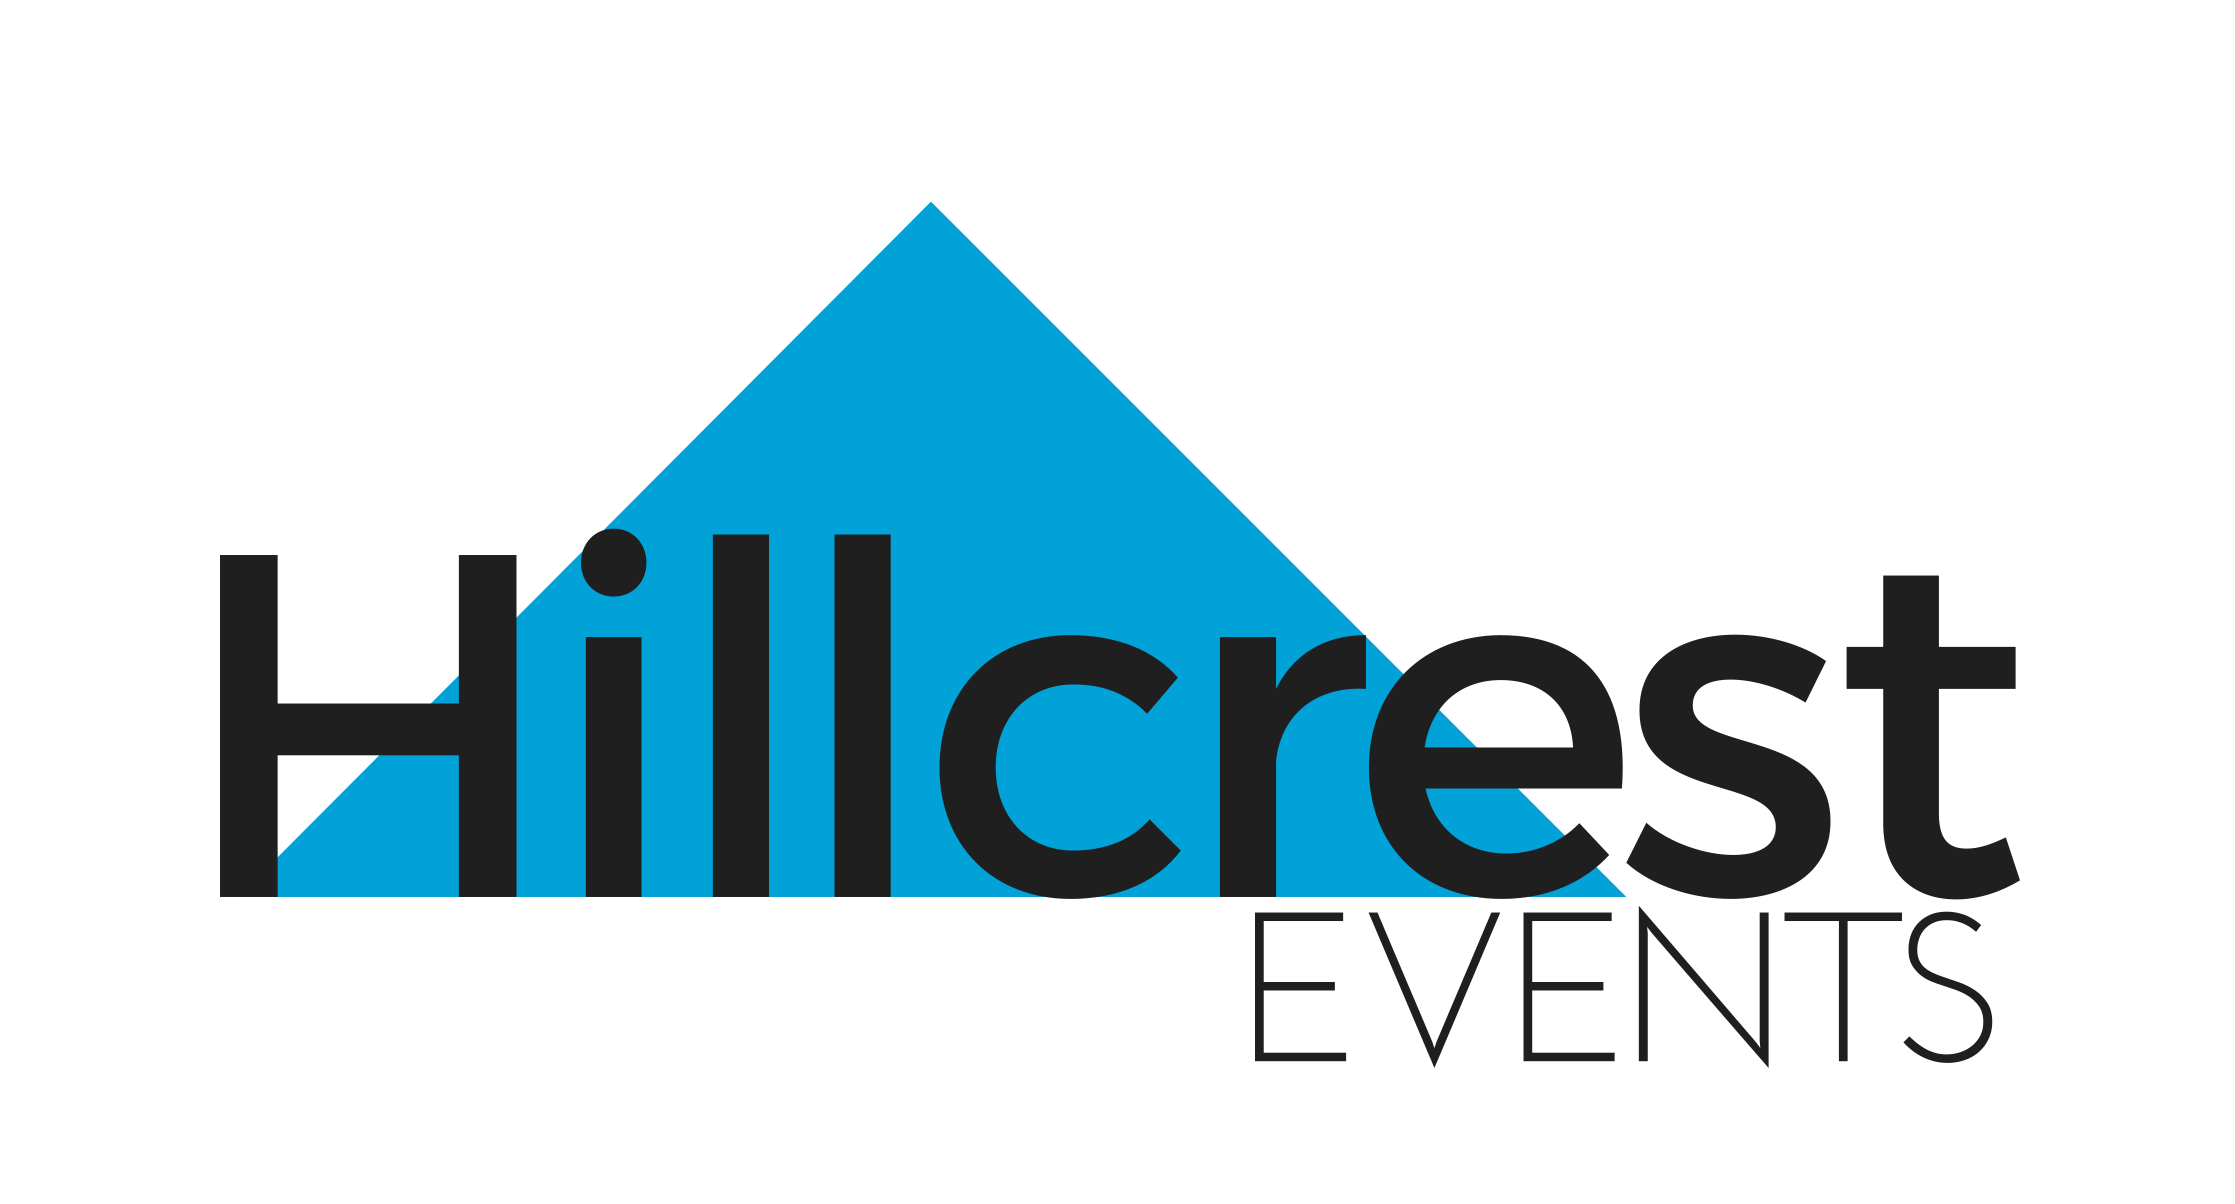 Hillcrest Events